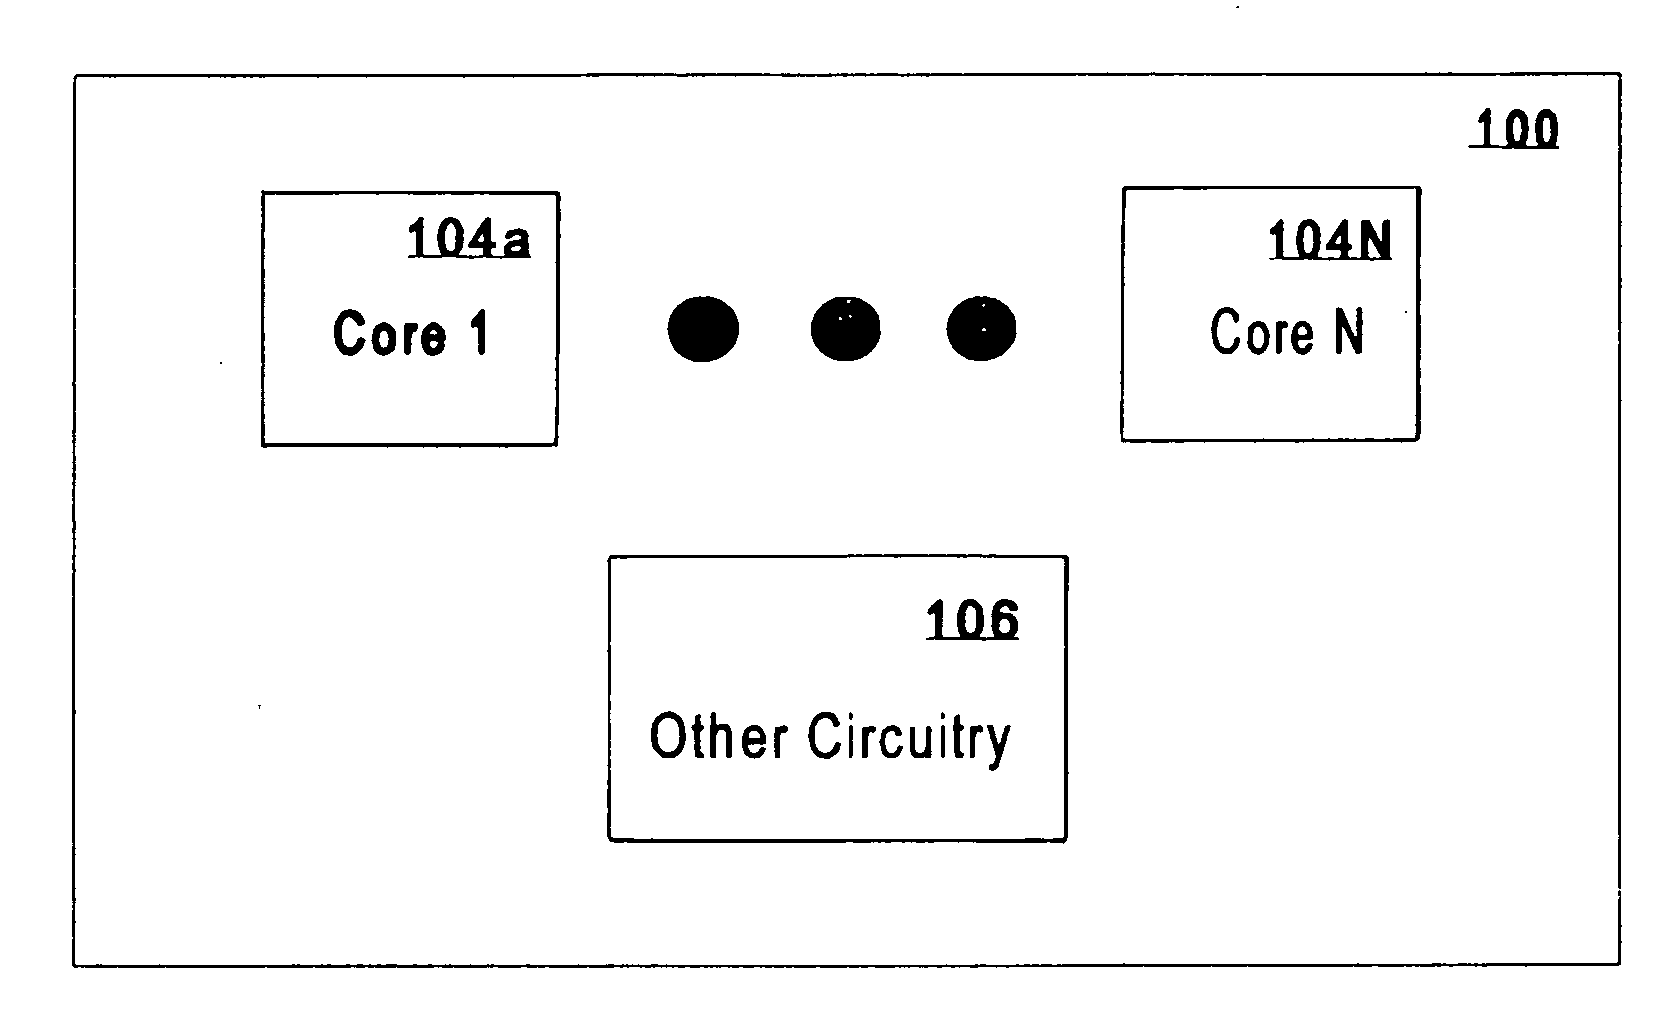 Circuit for Dynamic Circuit Timing Synthesis and Monitoring of Critical Paths and Environmental Conditions of an Integrated Circuit